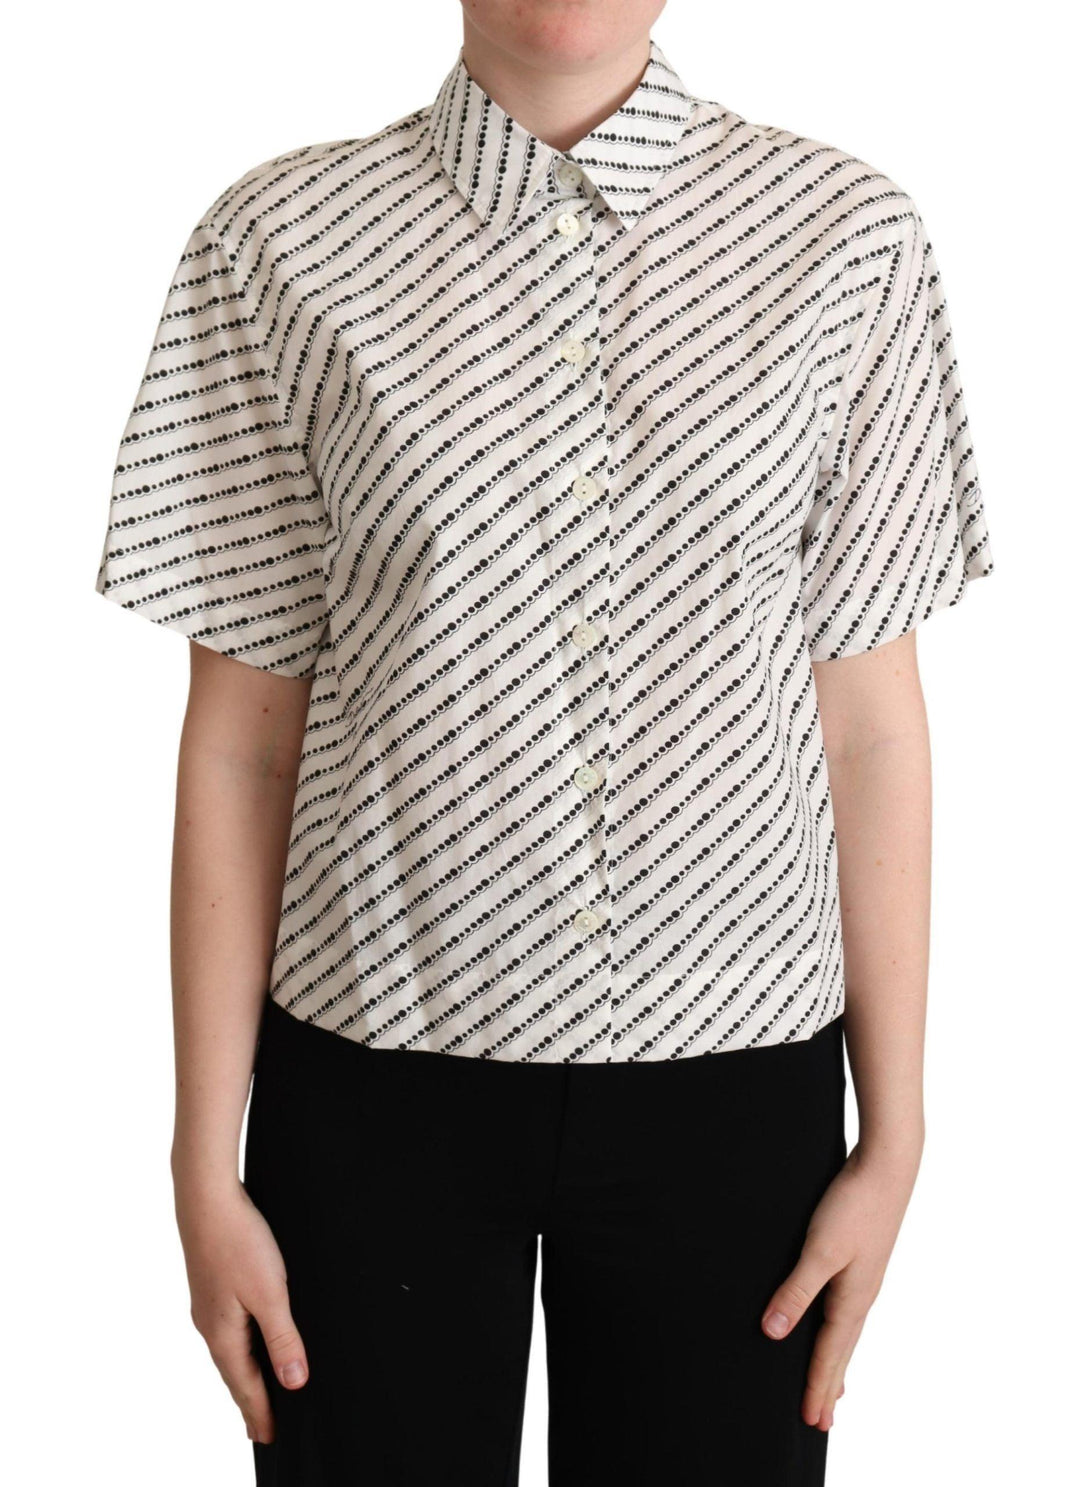 Dolce & Gabbana White Dotted Collared Blouse Shirt - Ellie Belle